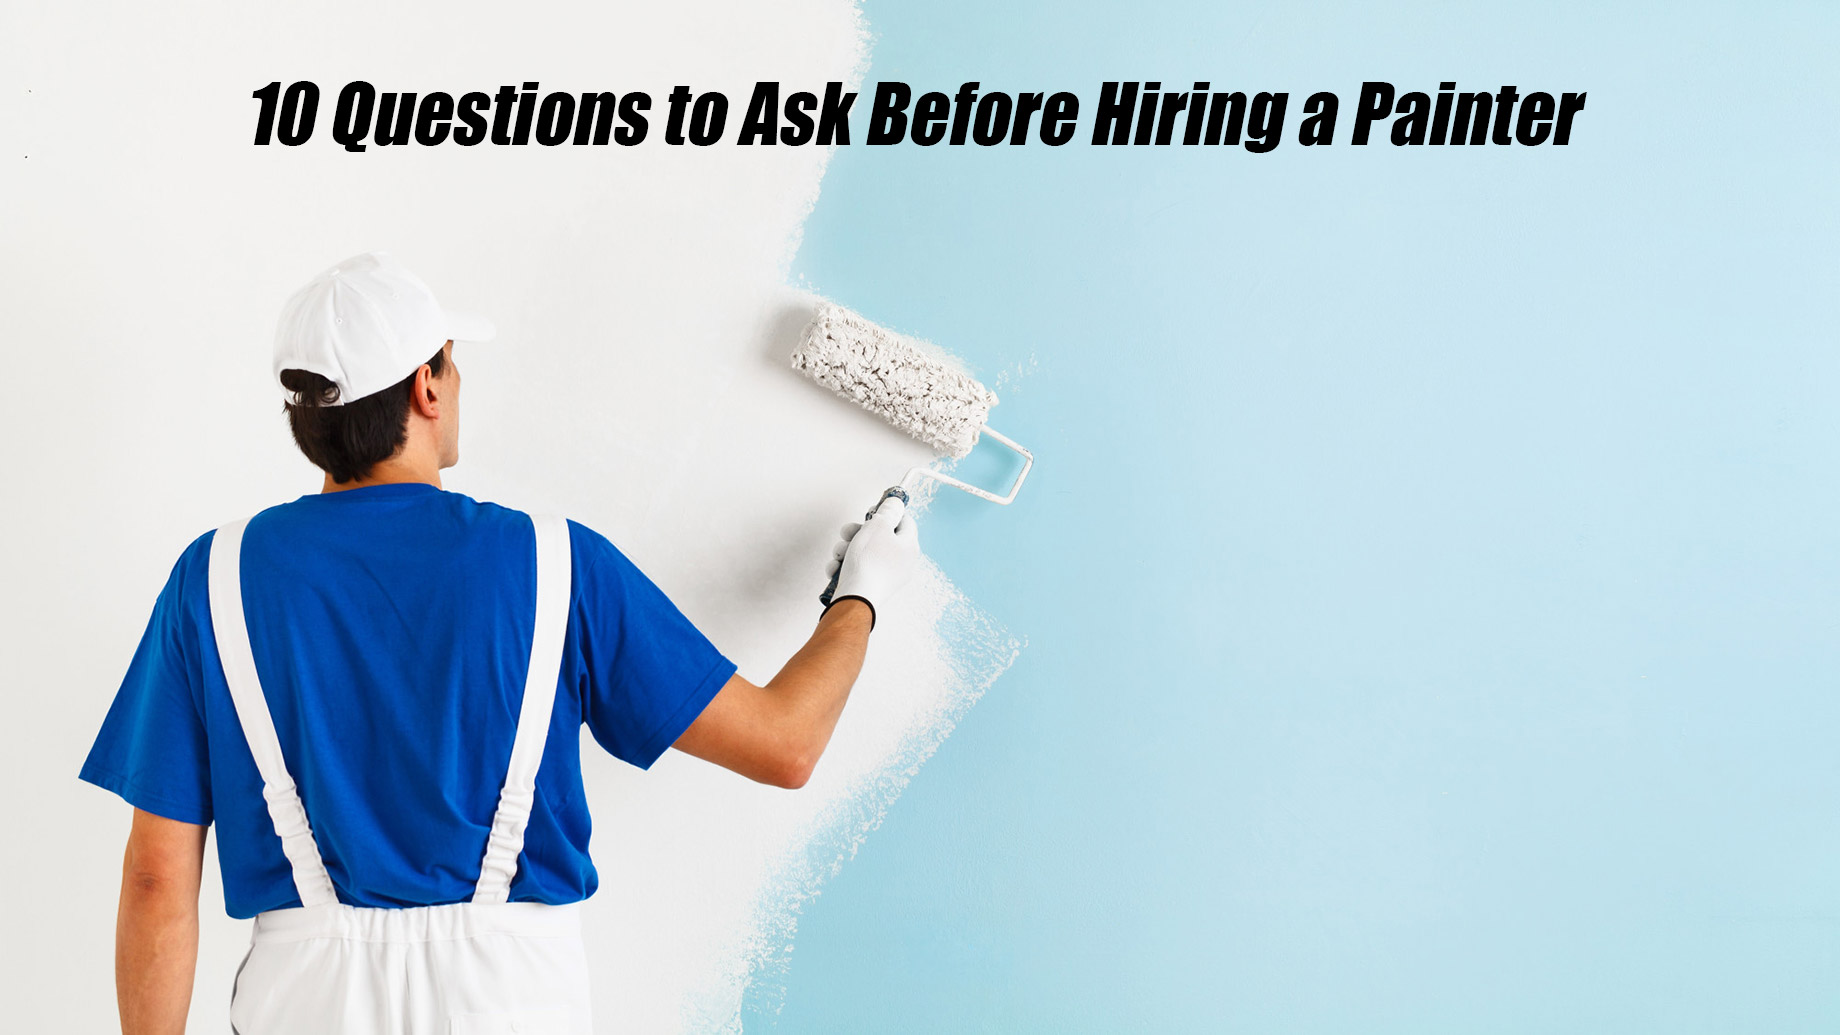 10 Questions to Ask Before Hiring a Painter